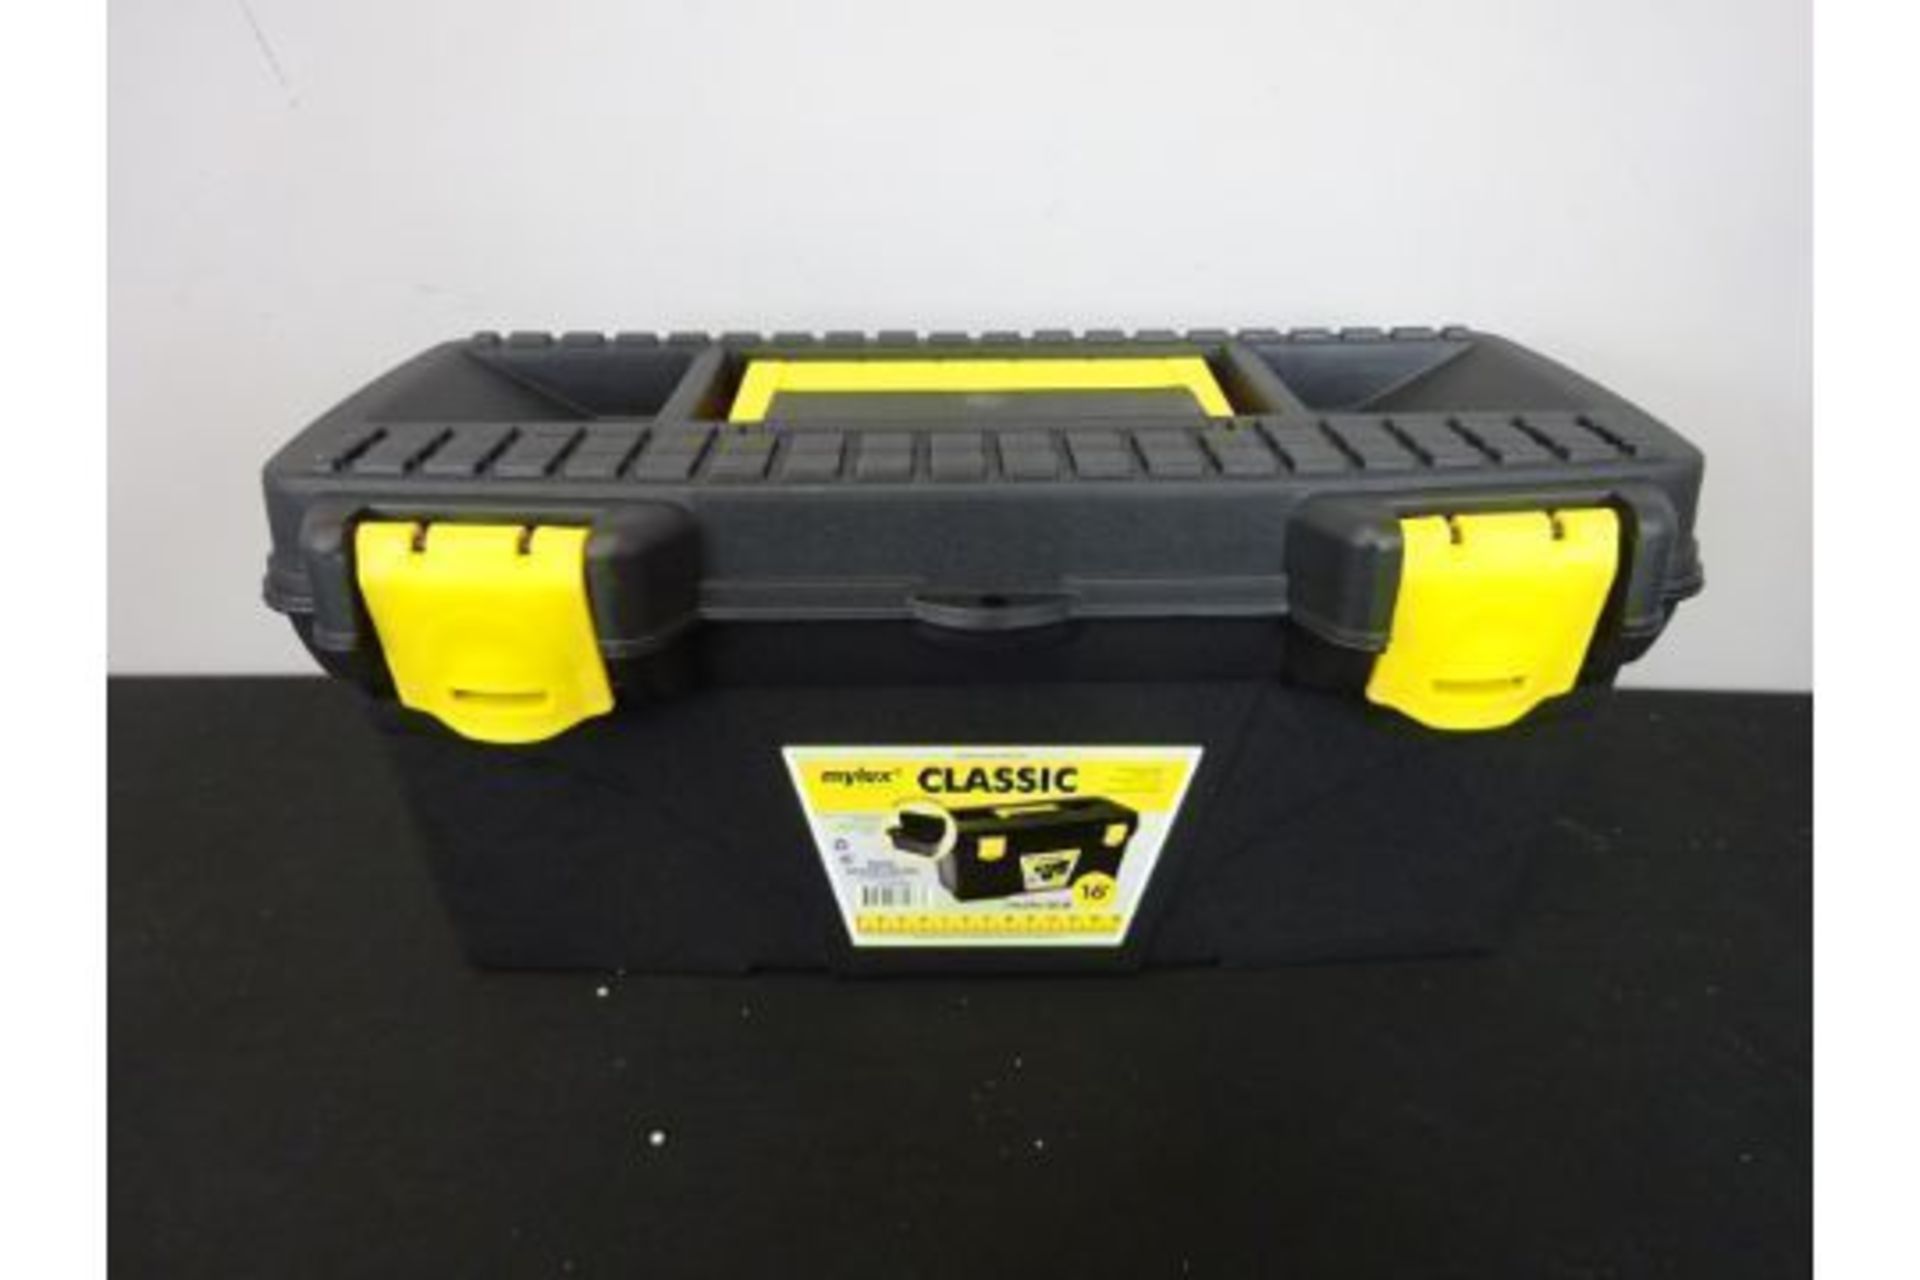 New 16" Tool Box With Lift Out Compartment - Image 2 of 2